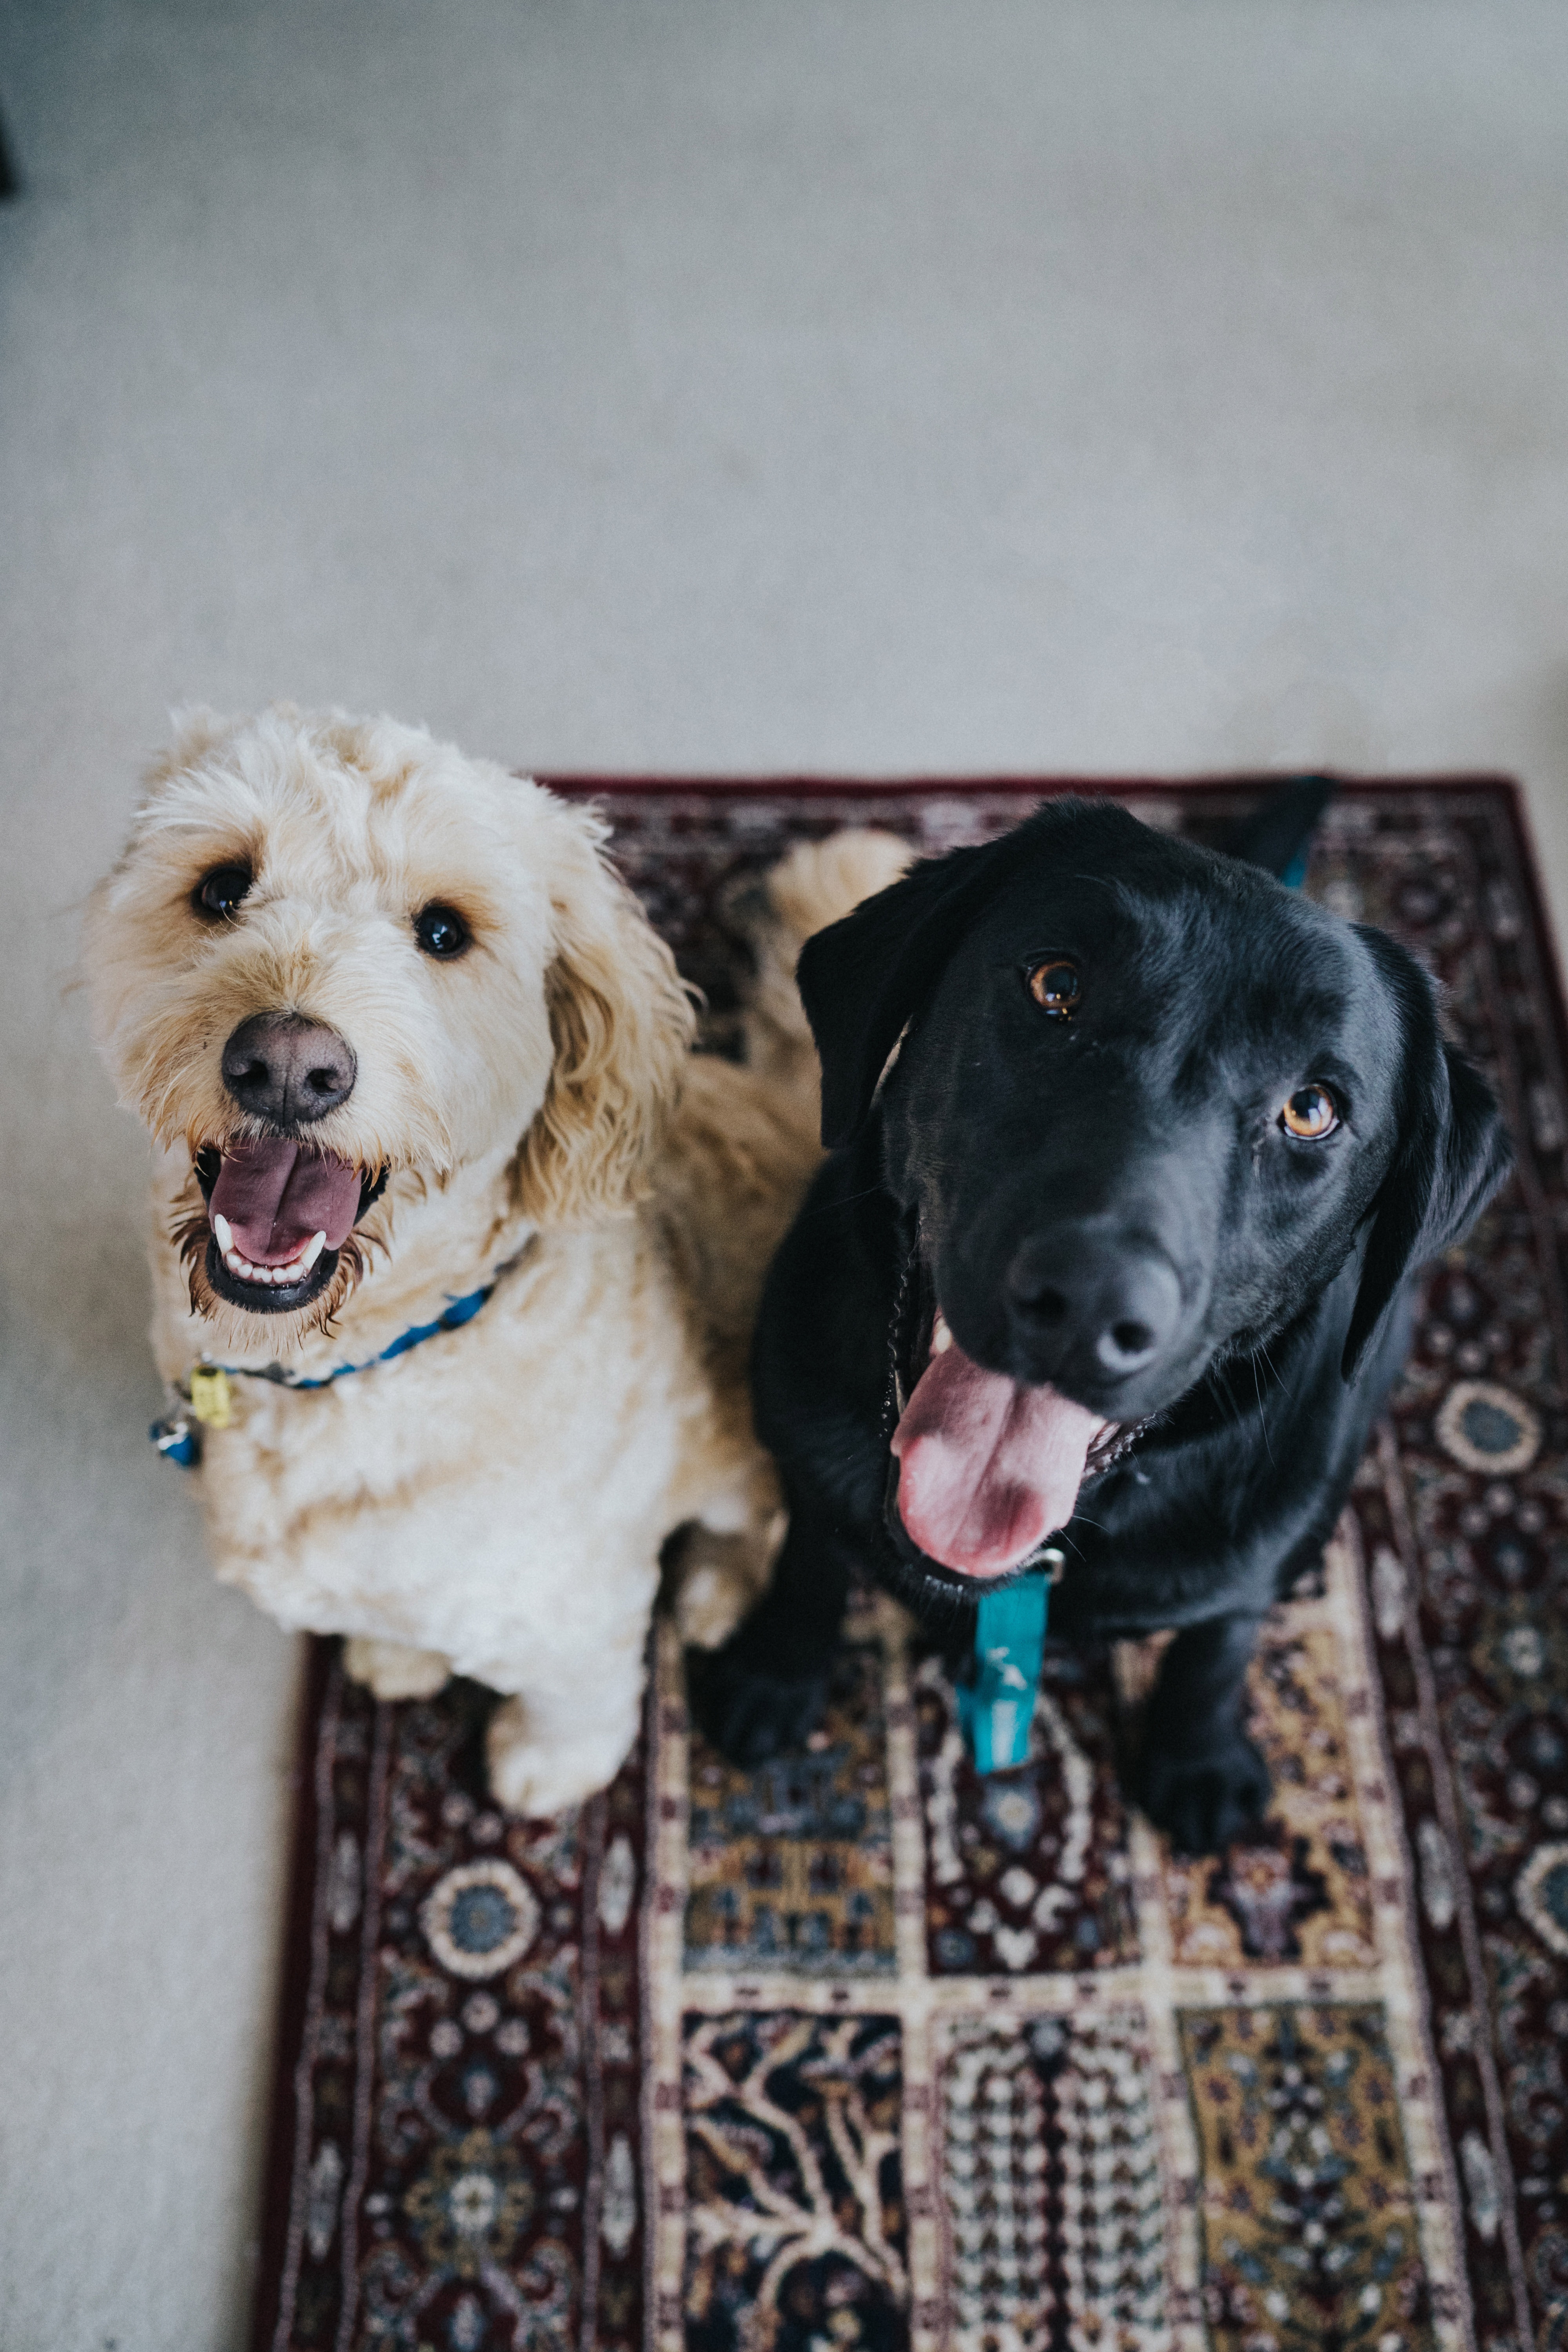 Dogs leave behind pet dander, odors, and urine stains. If you have a dog you need a carpet cleaning!